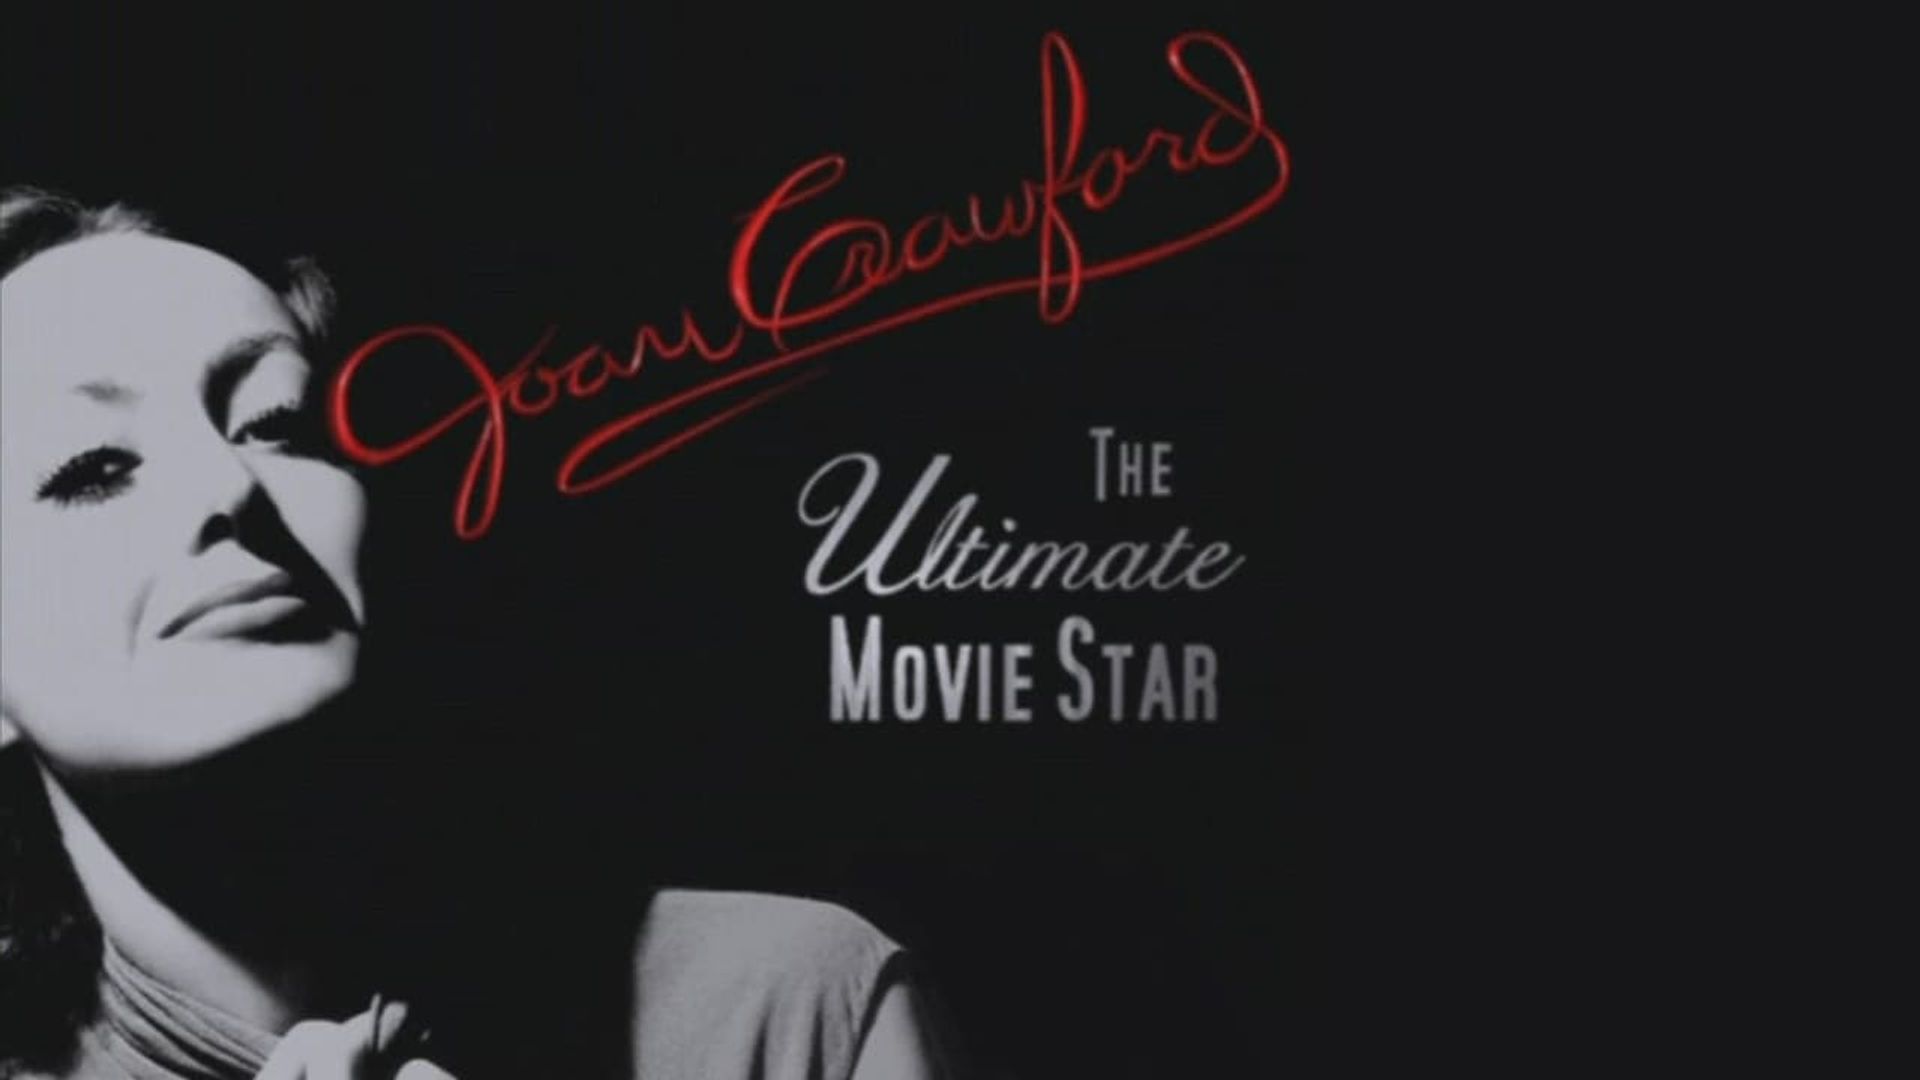 Joan Crawford: The Ultimate Movie Star background